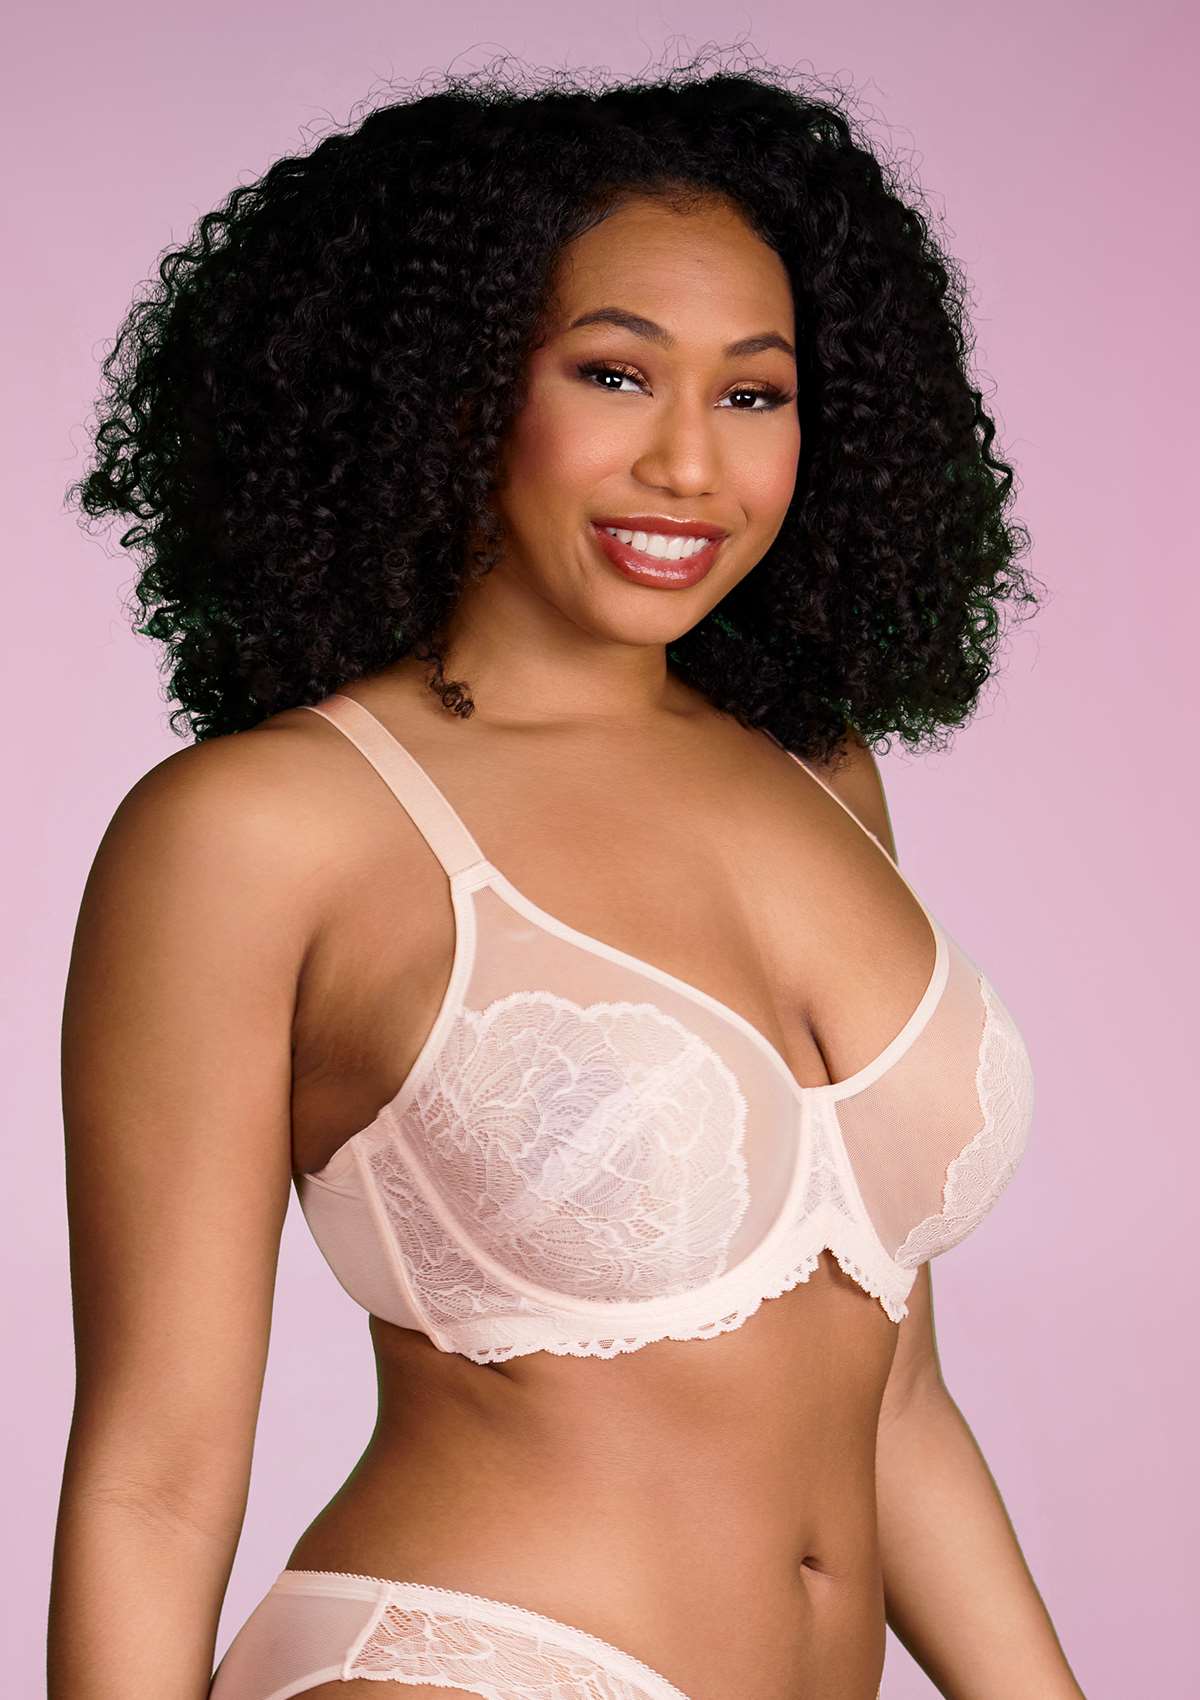 HSIA Blossom Sheer Lace Bra: Comfortable Underwire Bra For Big Busts - Dusty Peach / 36 / H